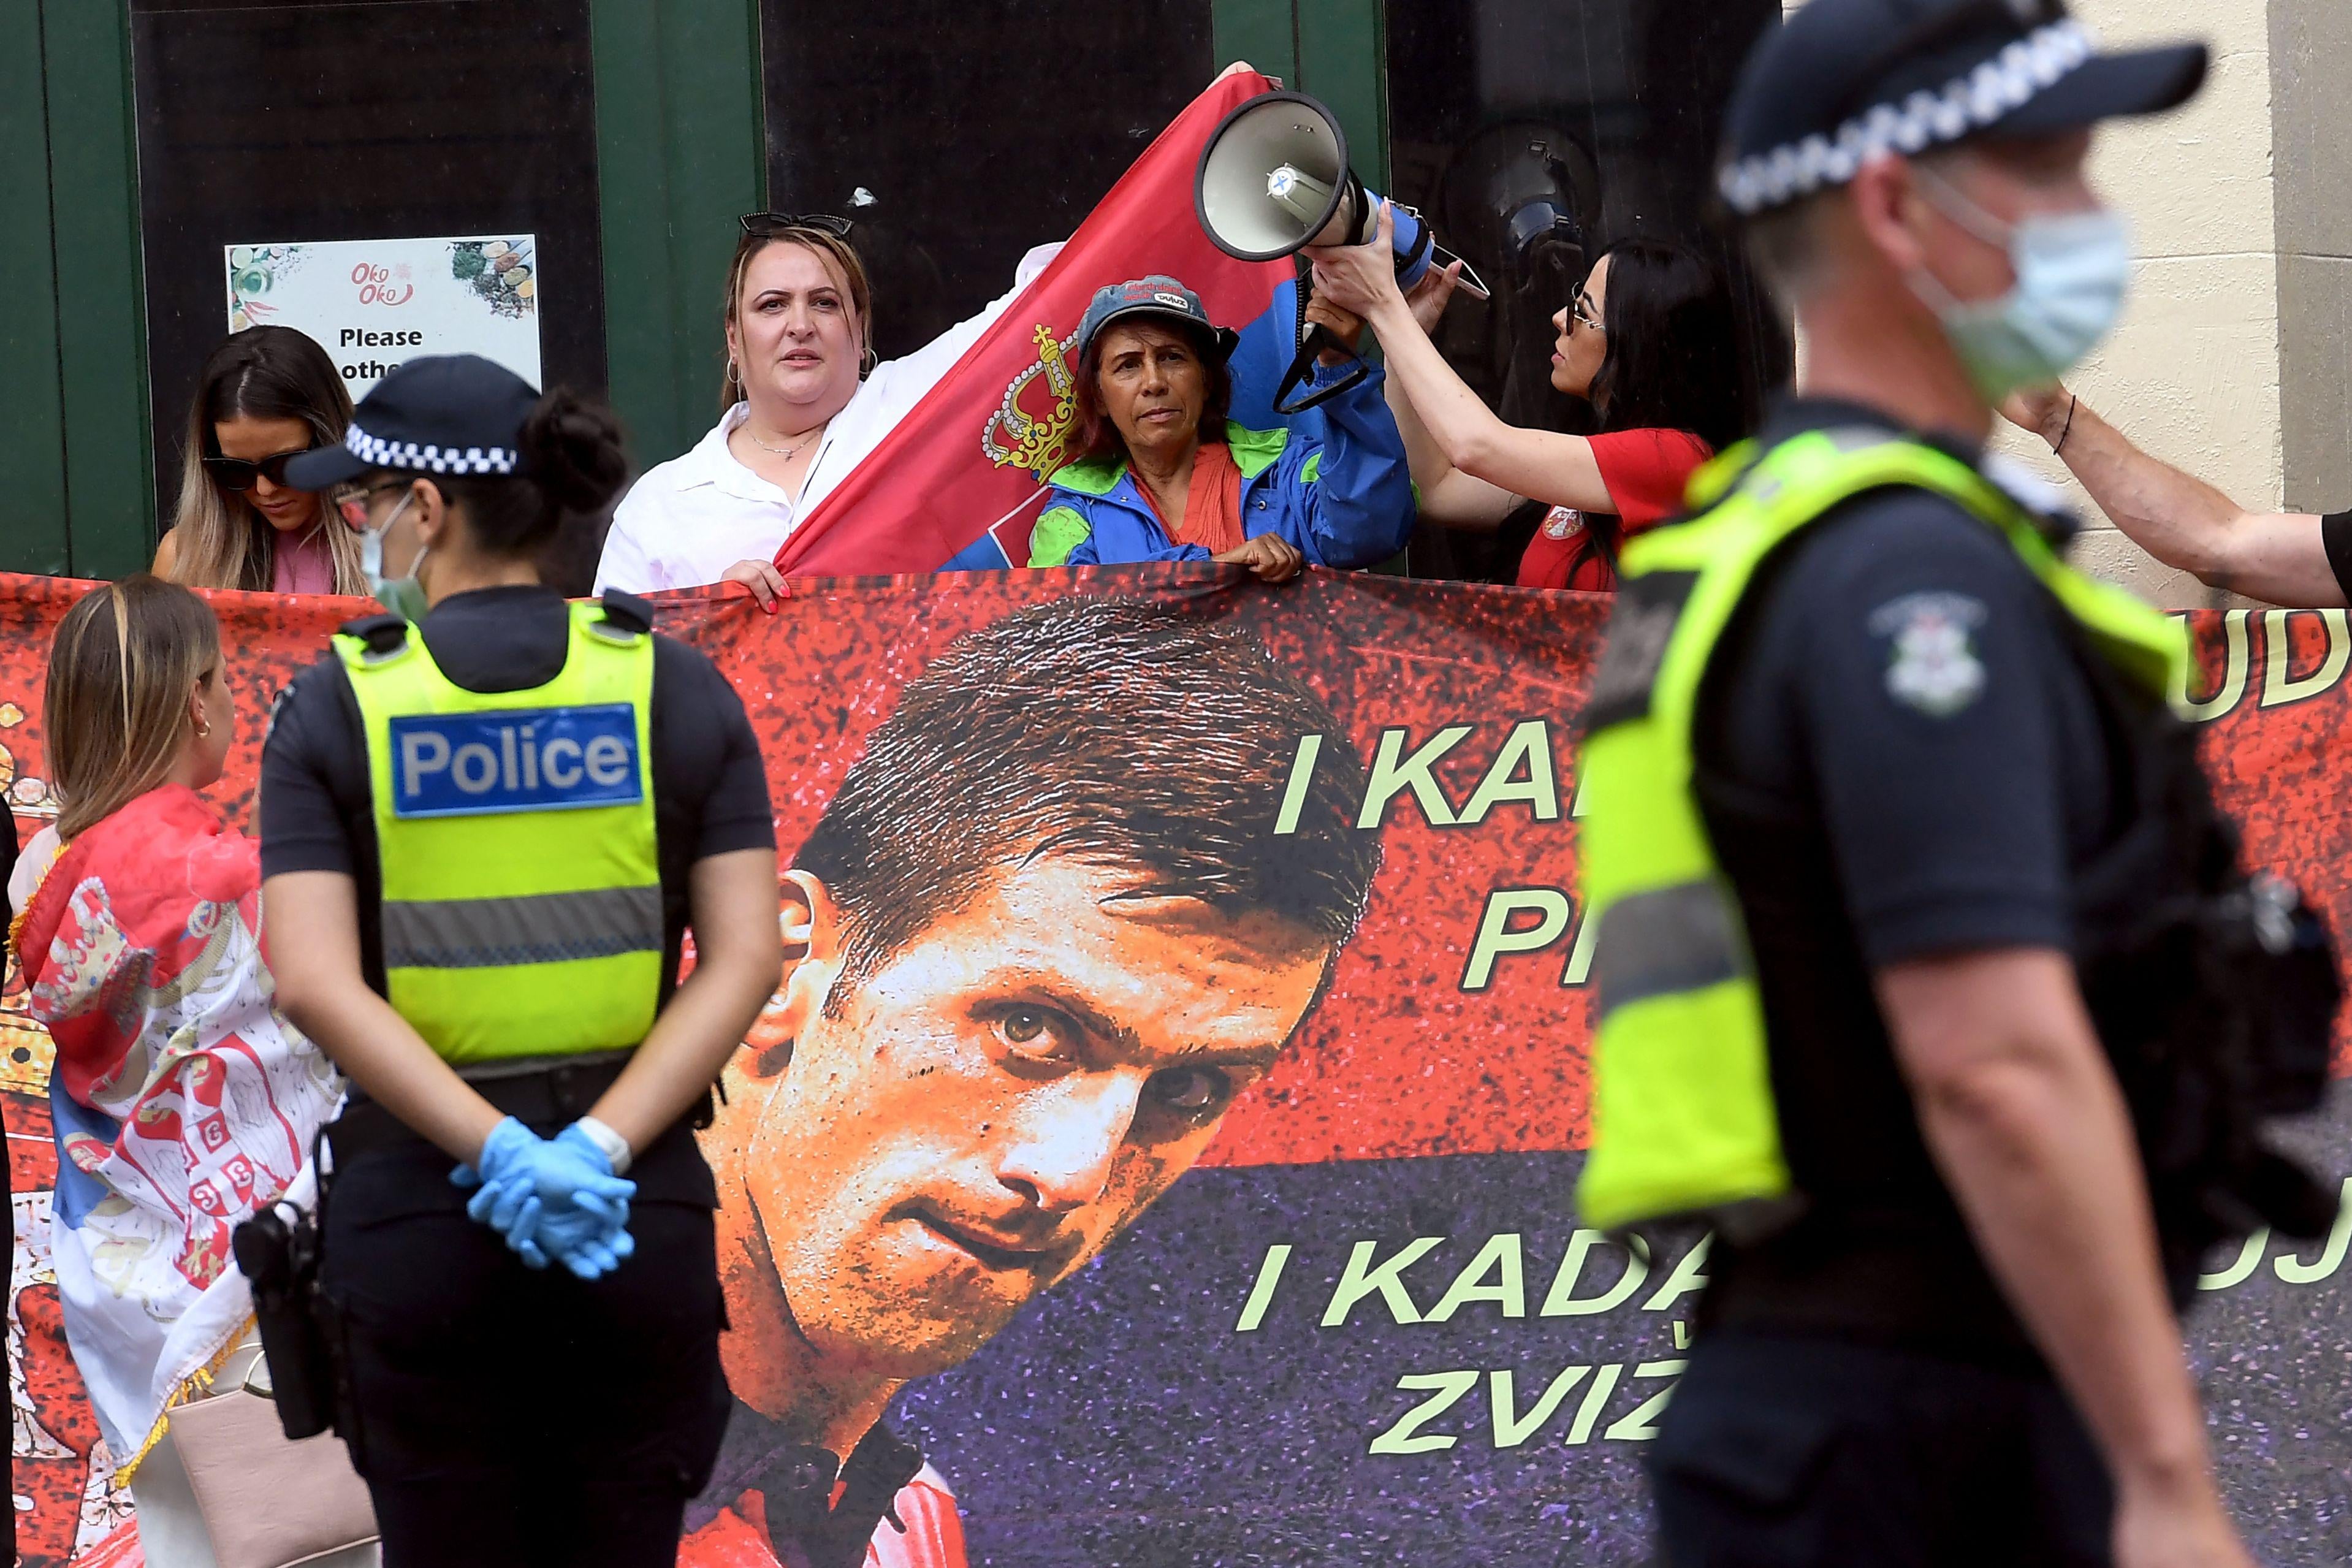 Novak supporters hold sings of support, a big one showing Djokovic's face, as police patrol the scene